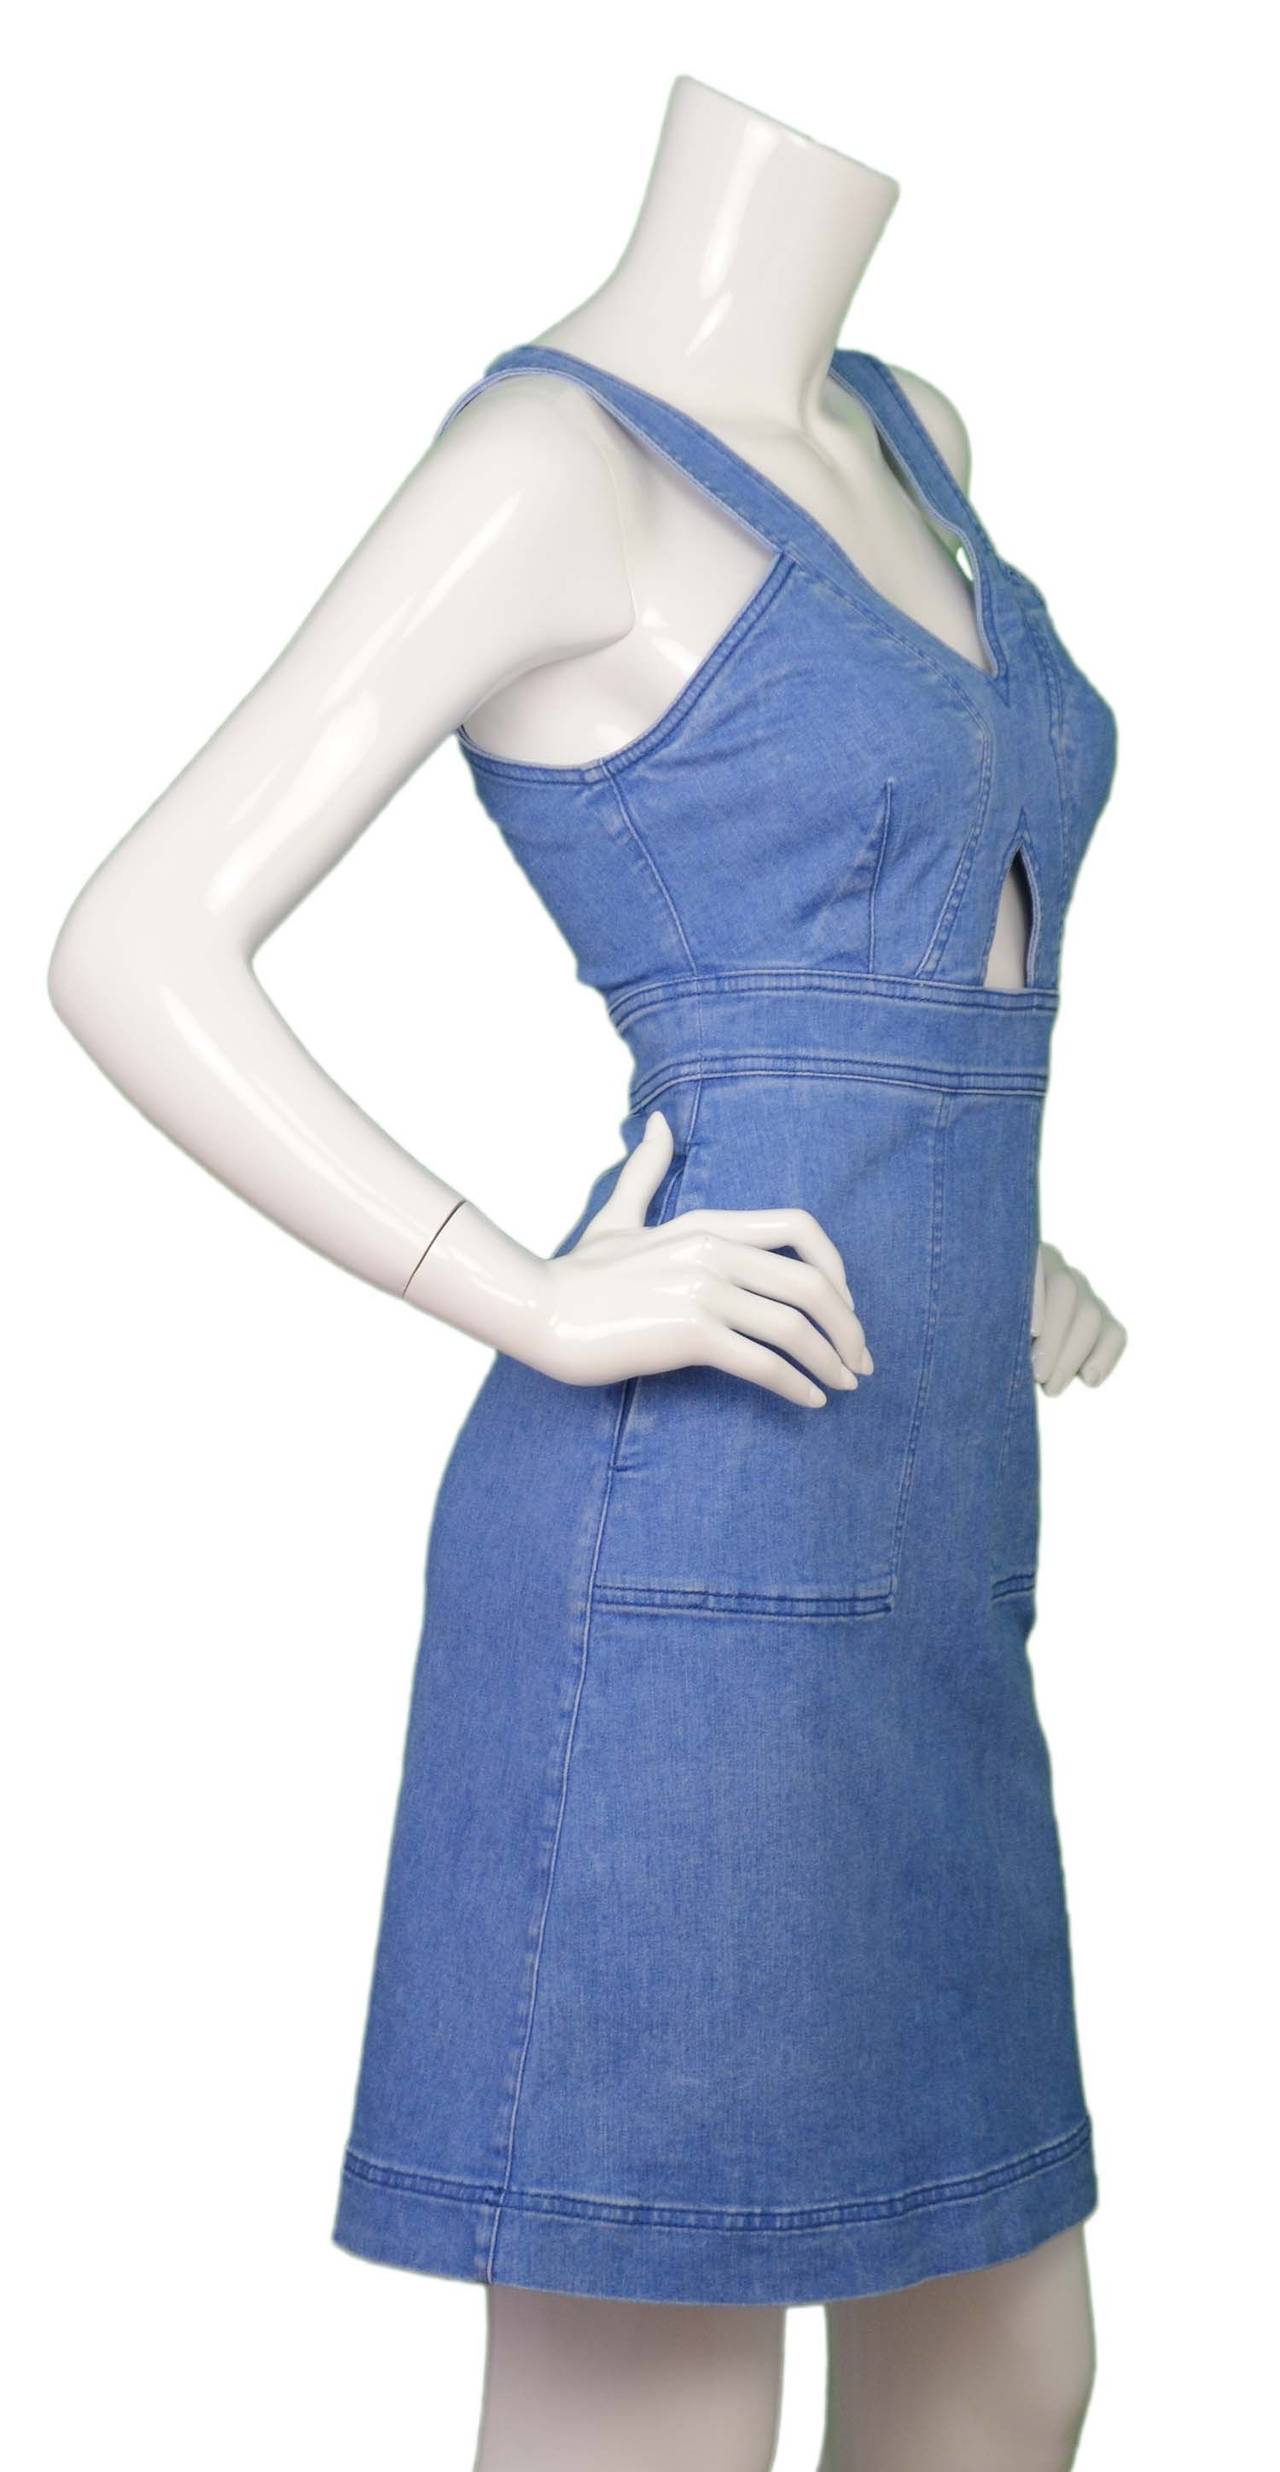 Stella McCartney Denim Keyhole Mini Dress
Made in: Italy
Year of Production: 2015
Color: Baby blue
Composition: 91% cotton, 7% polyester, 2% elastane
Lining: None
Closure/opening: Back center zip up closure
Exterior Pockets: Two side patch